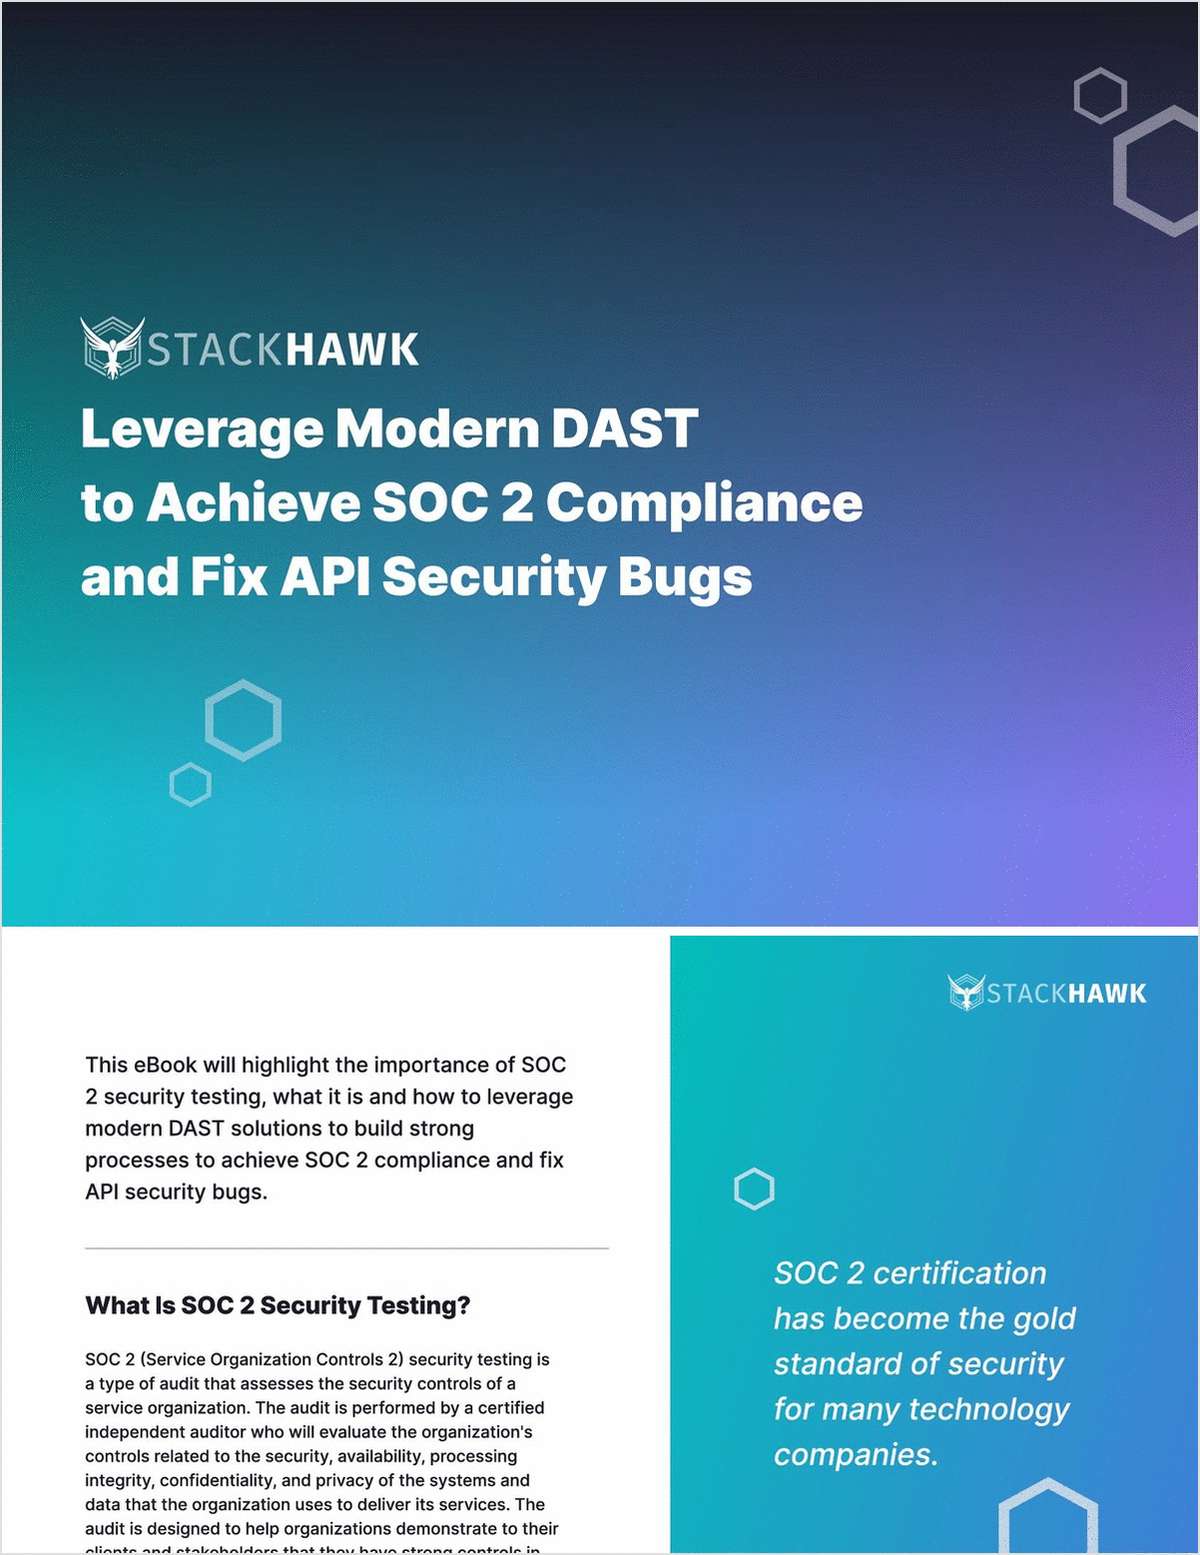 Leverage Modern DAST to Achieve SOC 2 Compliance and Fix API Security Bugs